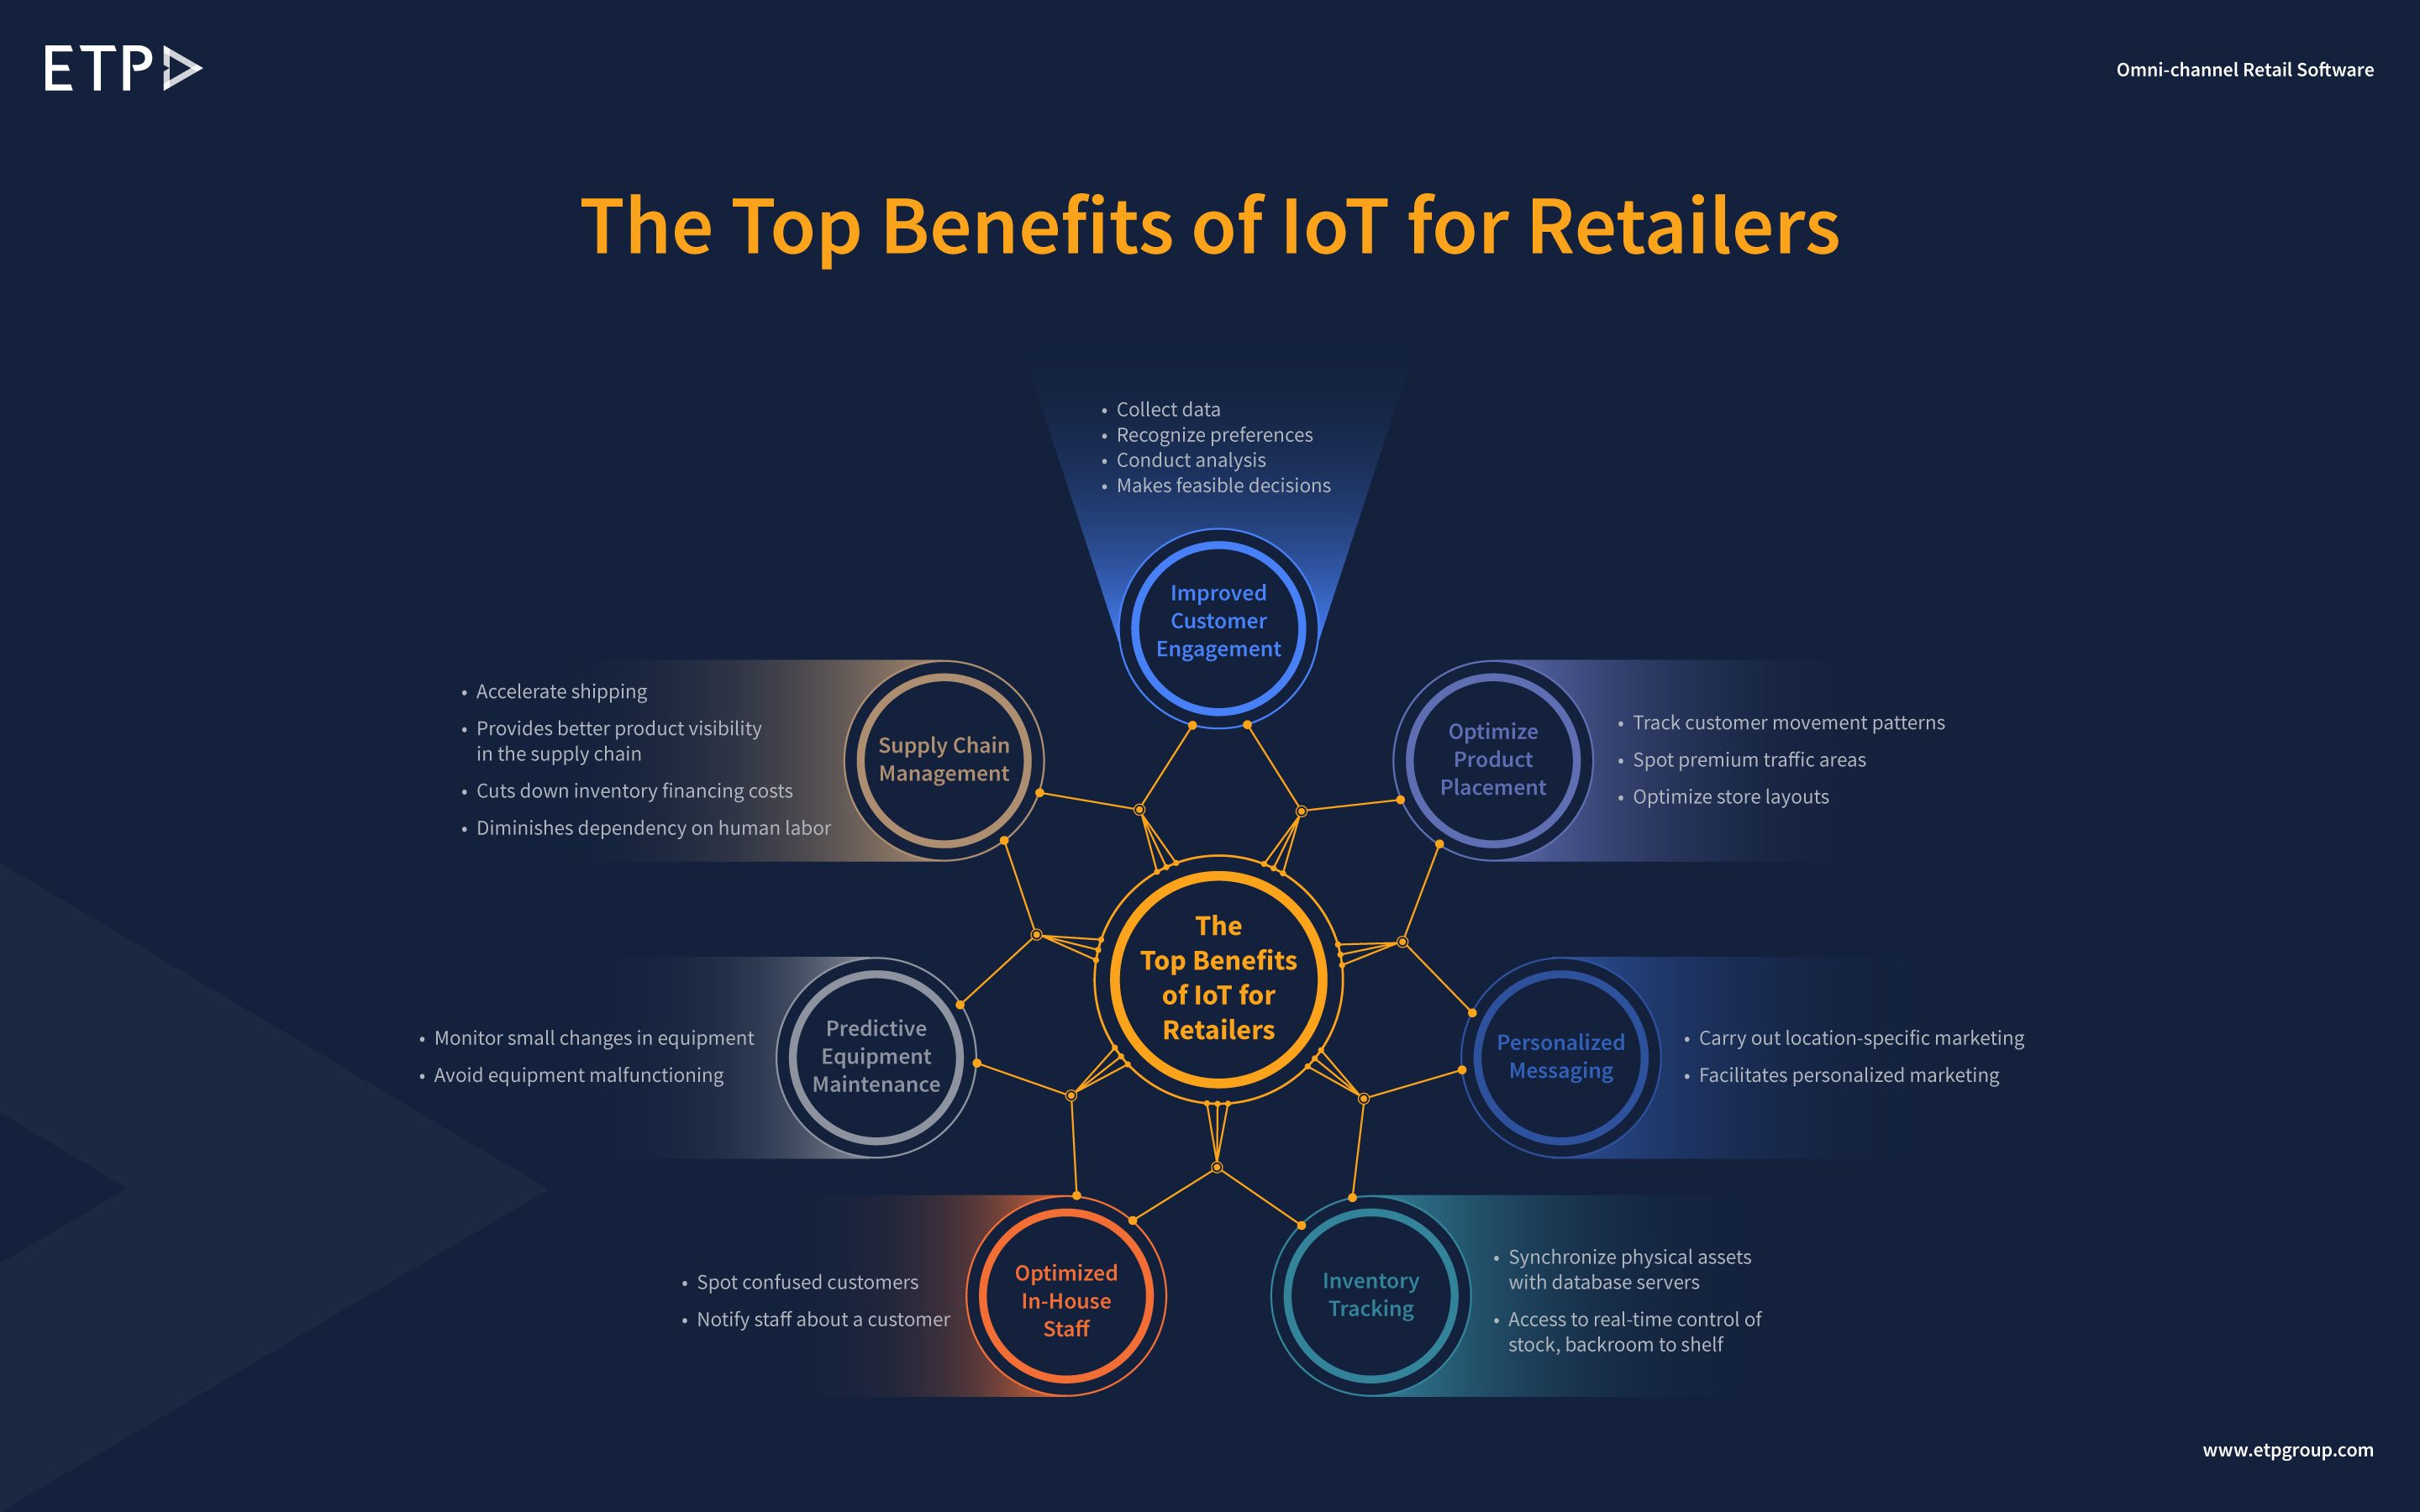 The Top Benefits of IoT for Retailers